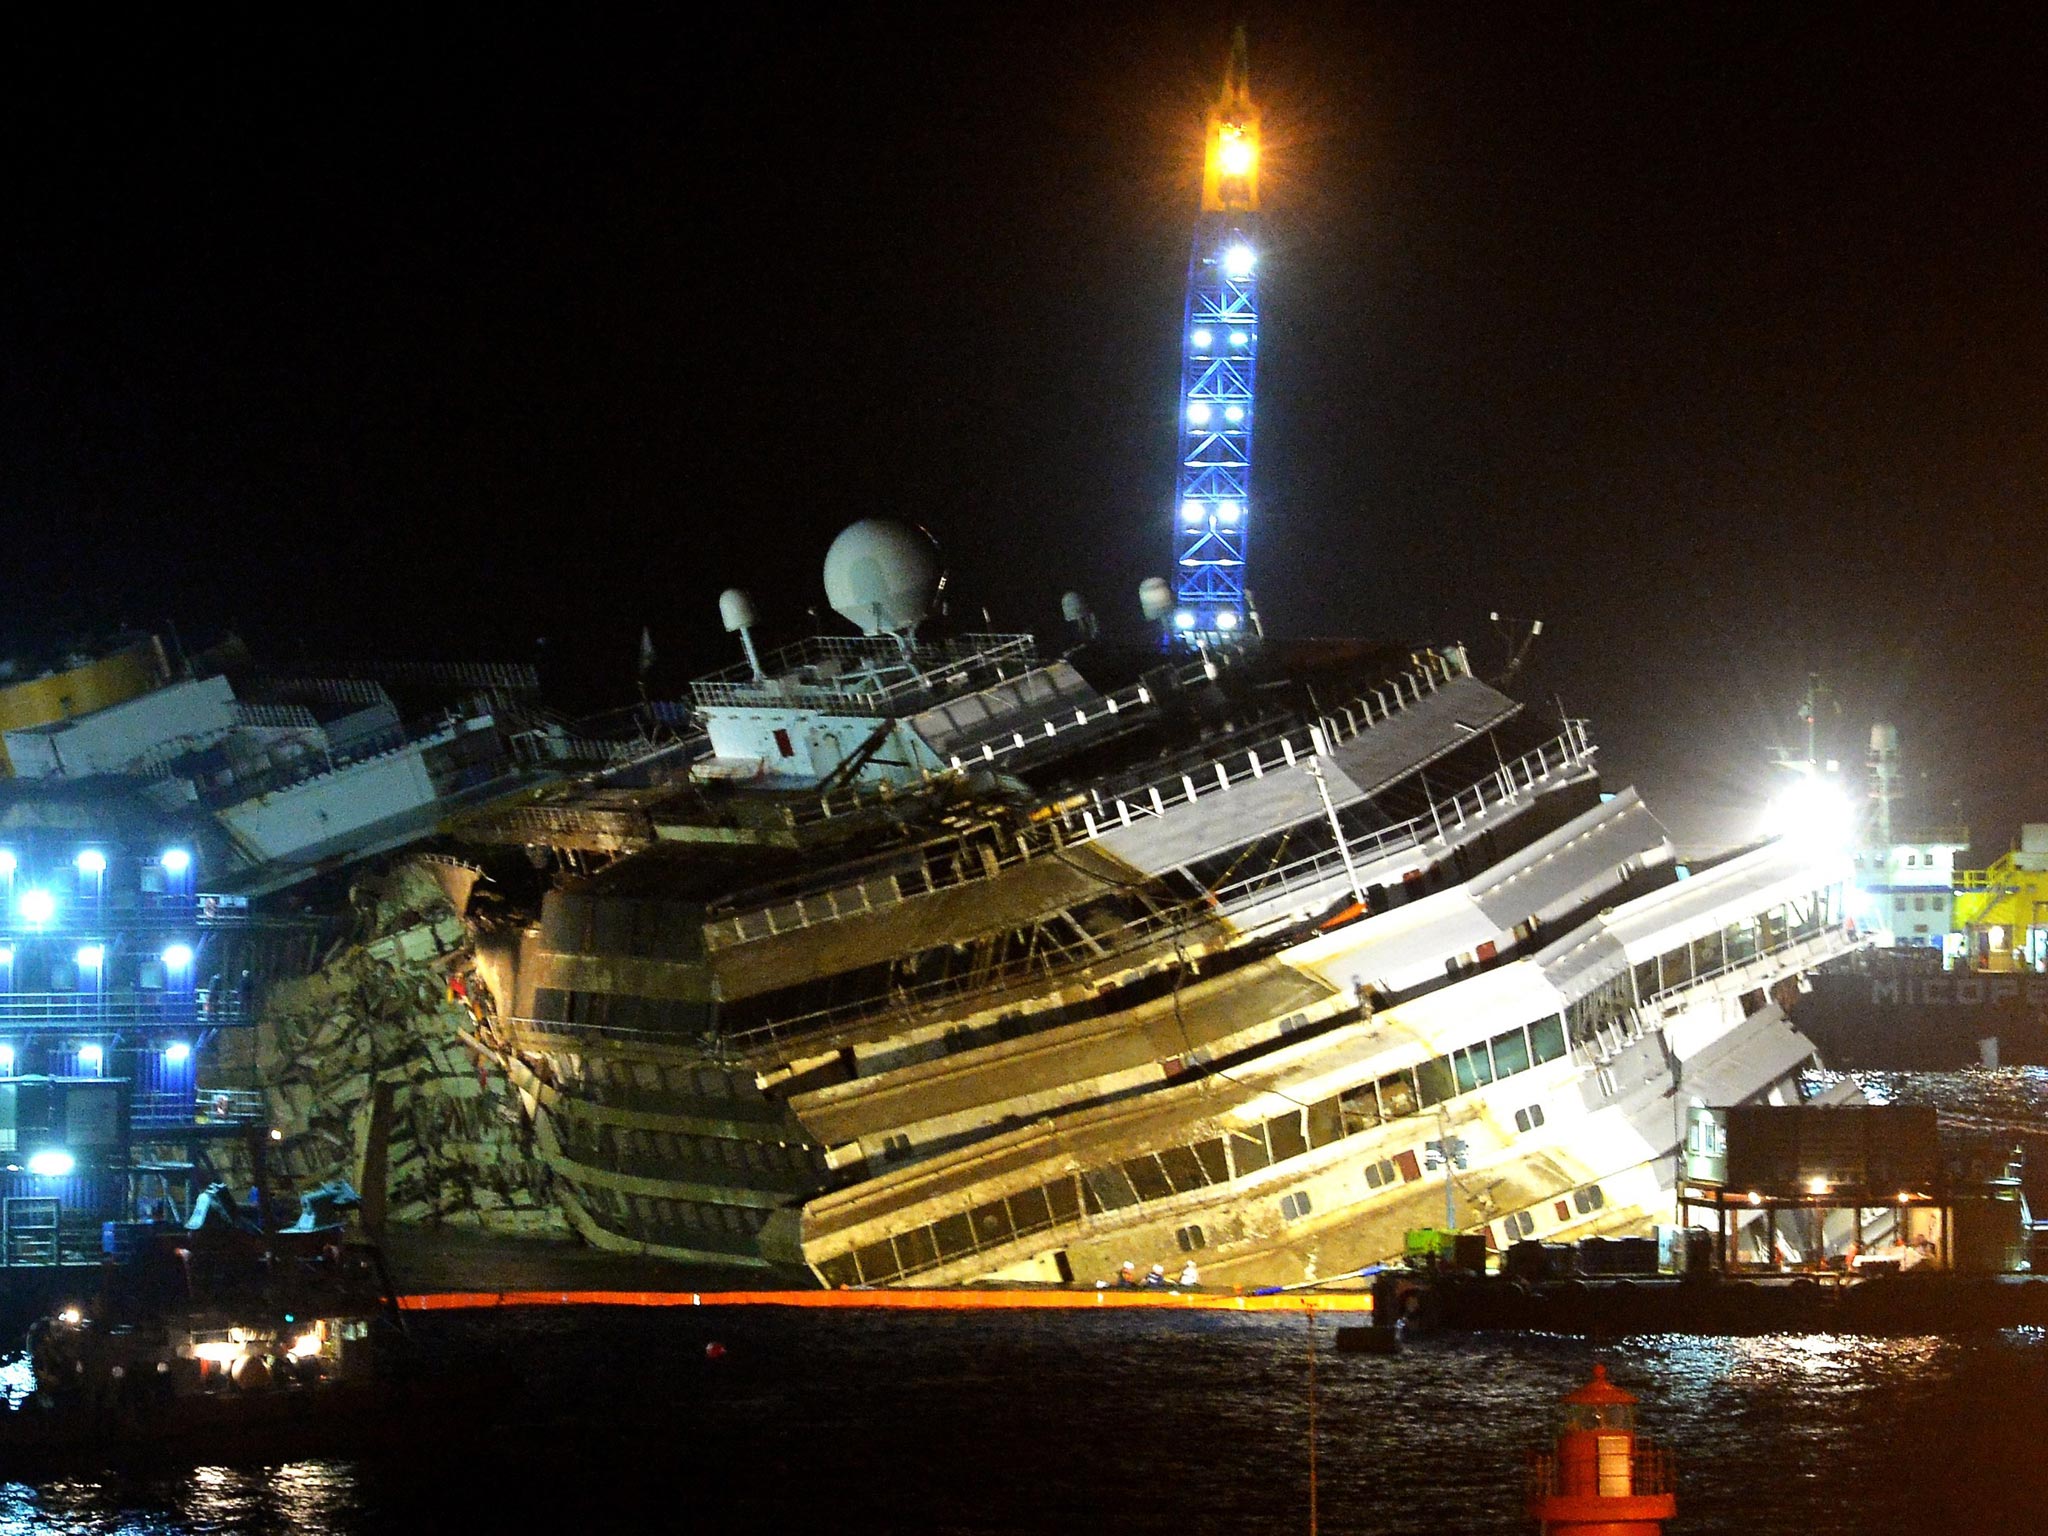 17 September 2013: The wreckage of Italy's Costa Concordia cruise ship which begins to emerge from water near the harbour of Giglio Porto.